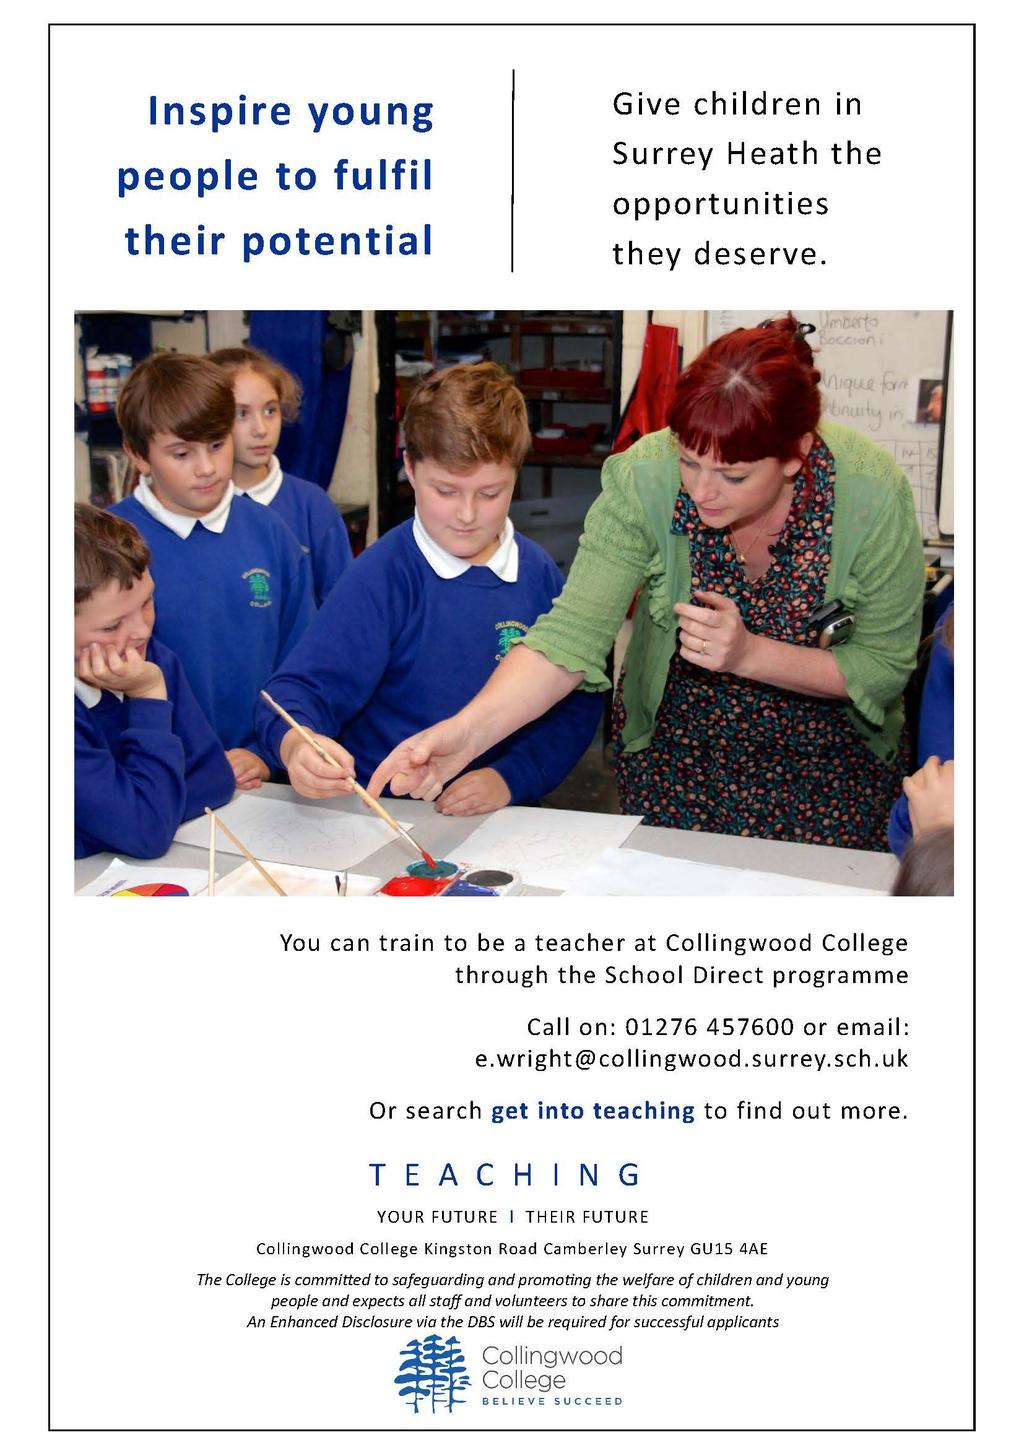 Please note Collingwood College s advertising terms: The appearance of an advert in our Newsletter does not mean